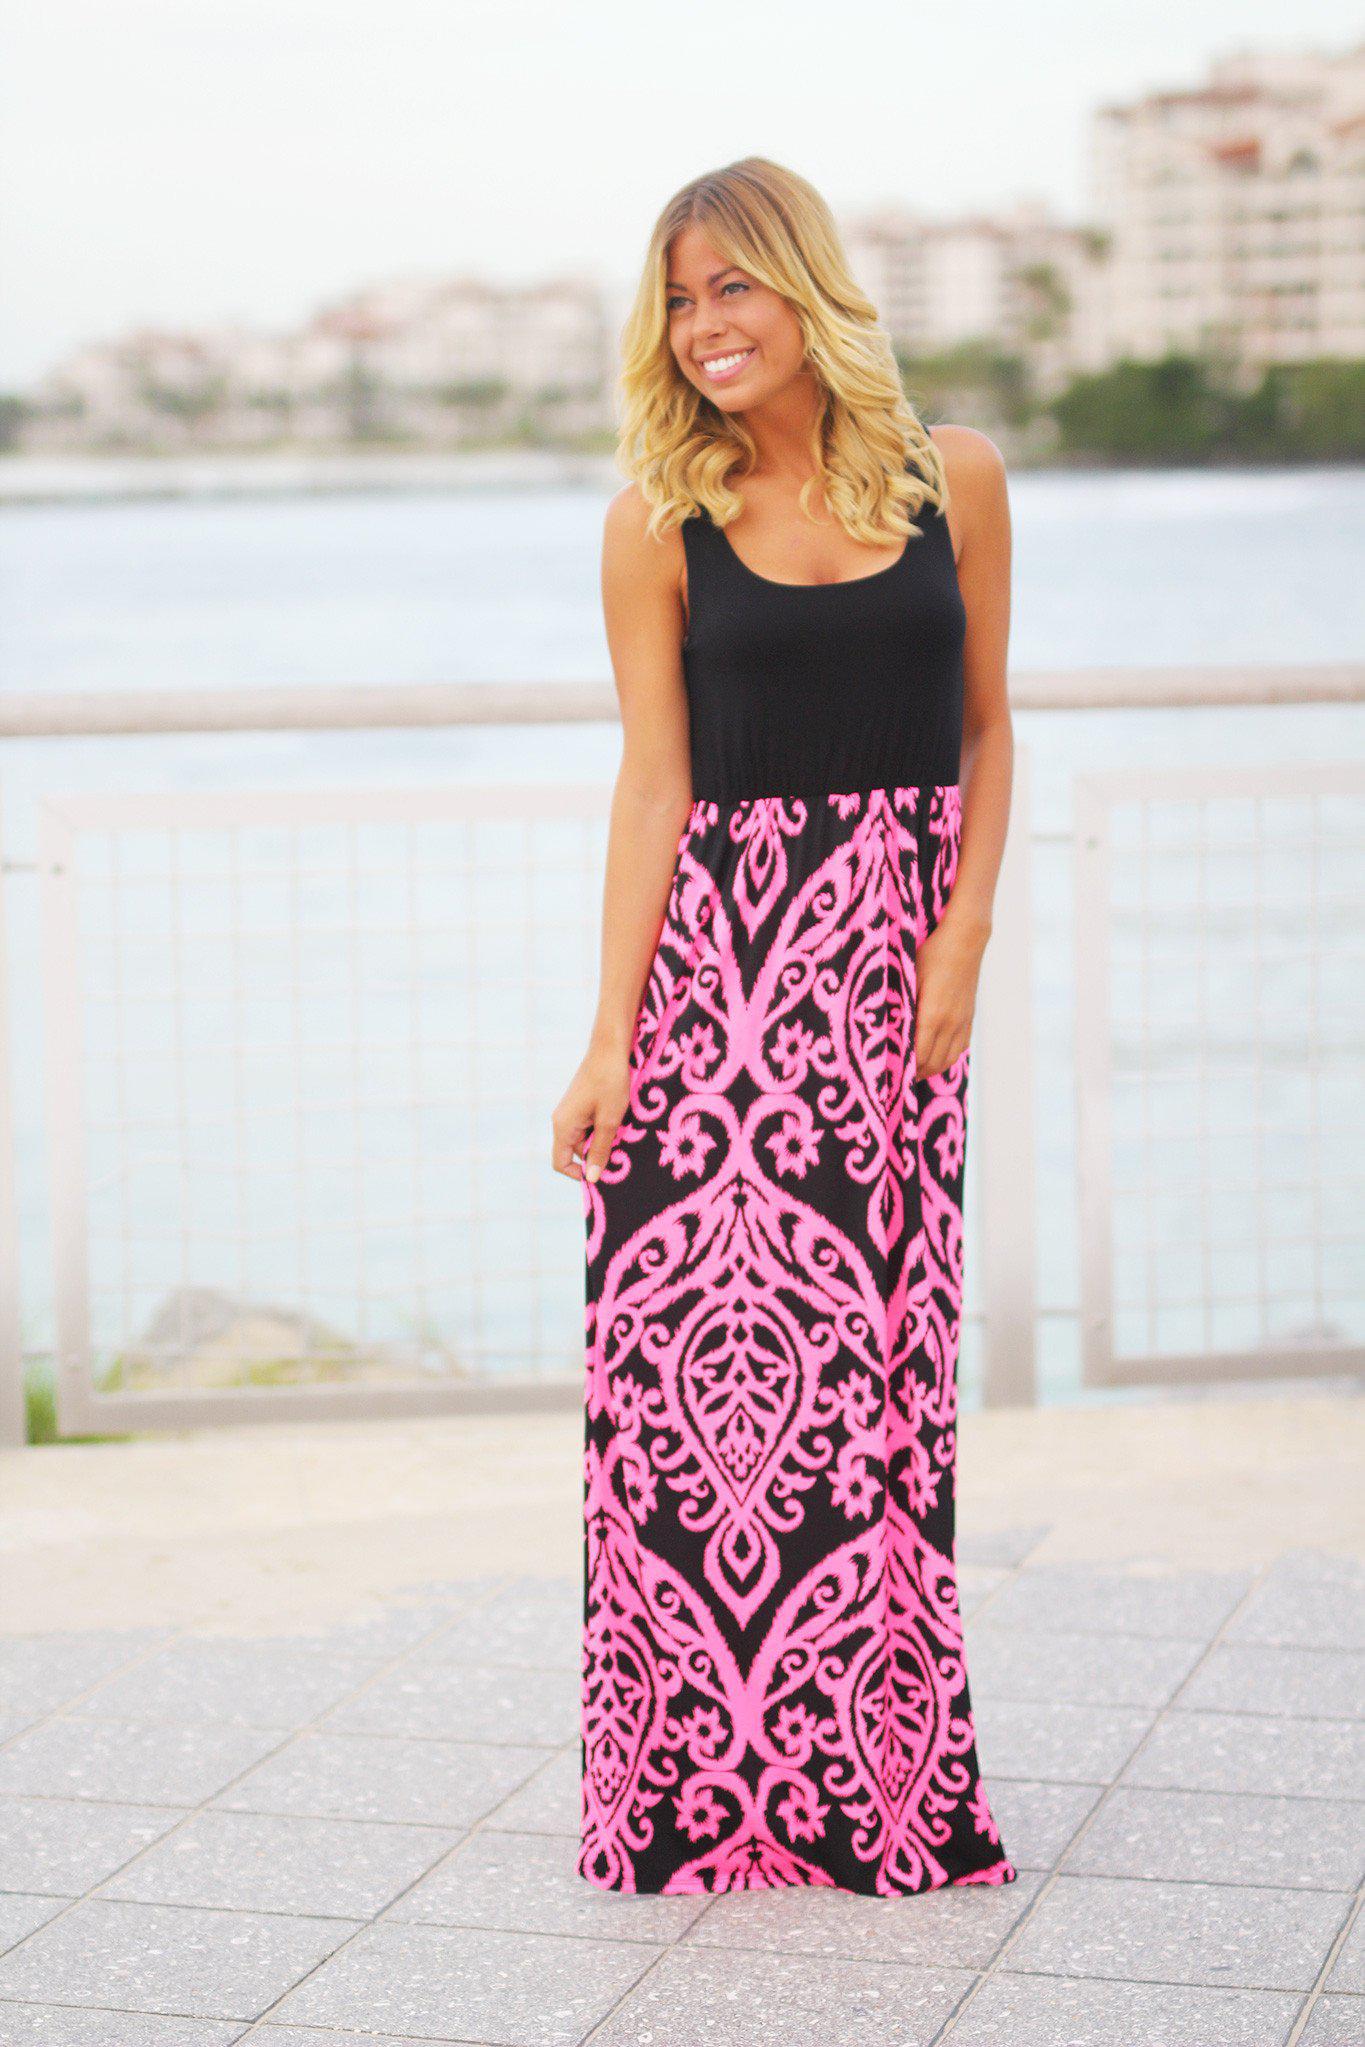 Black and Neon Pink Printed Maxi Dress